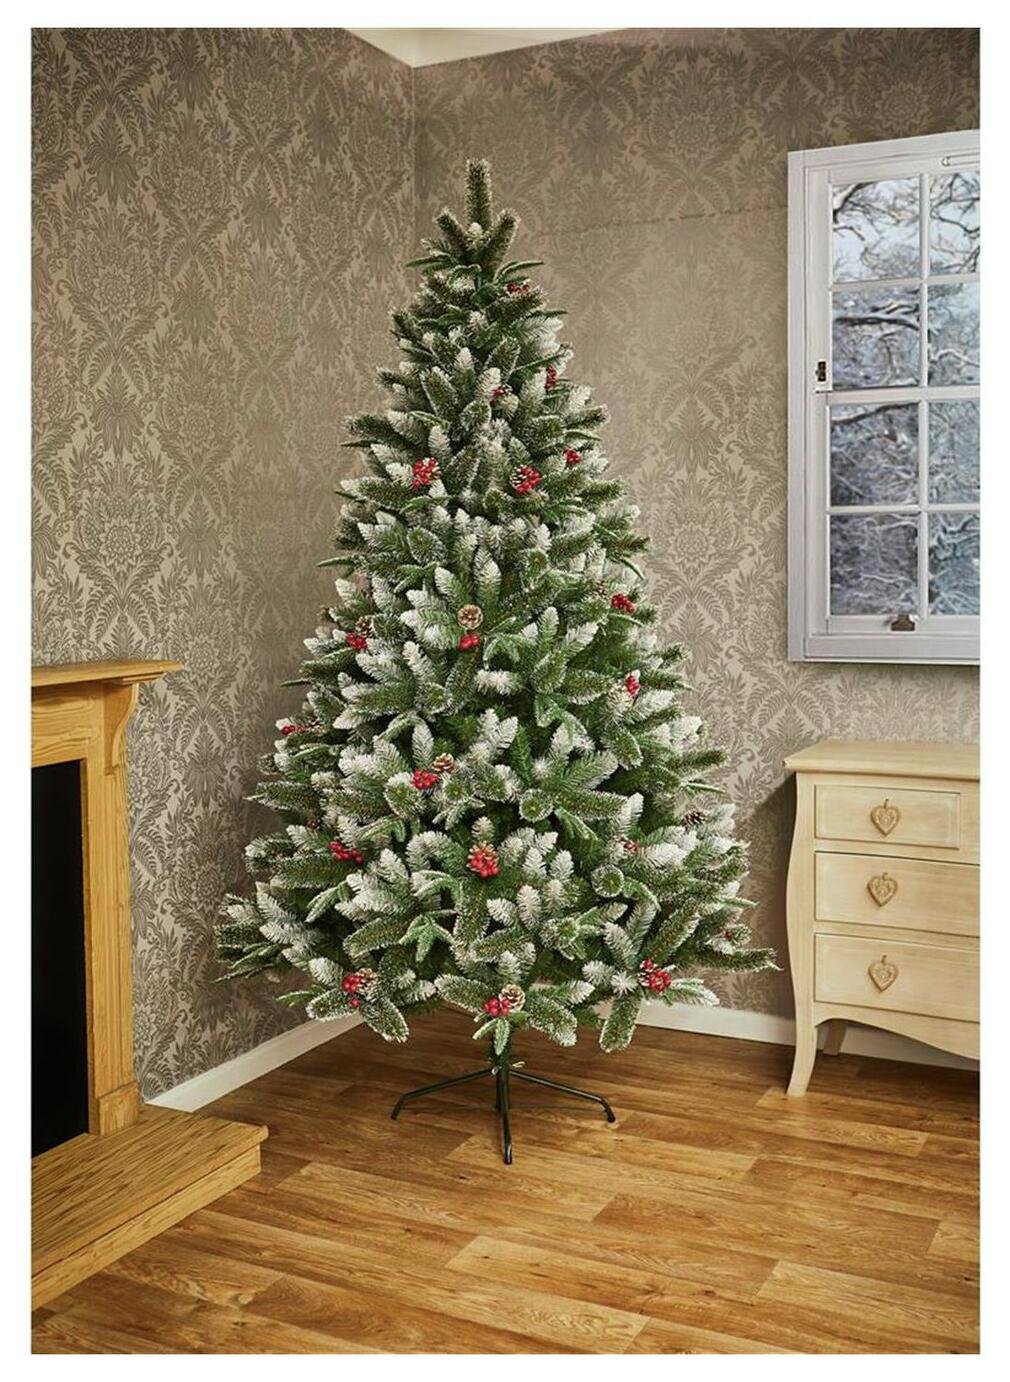 Premier Decorations 7ft Jersey Spruce Christmas Tree - Green